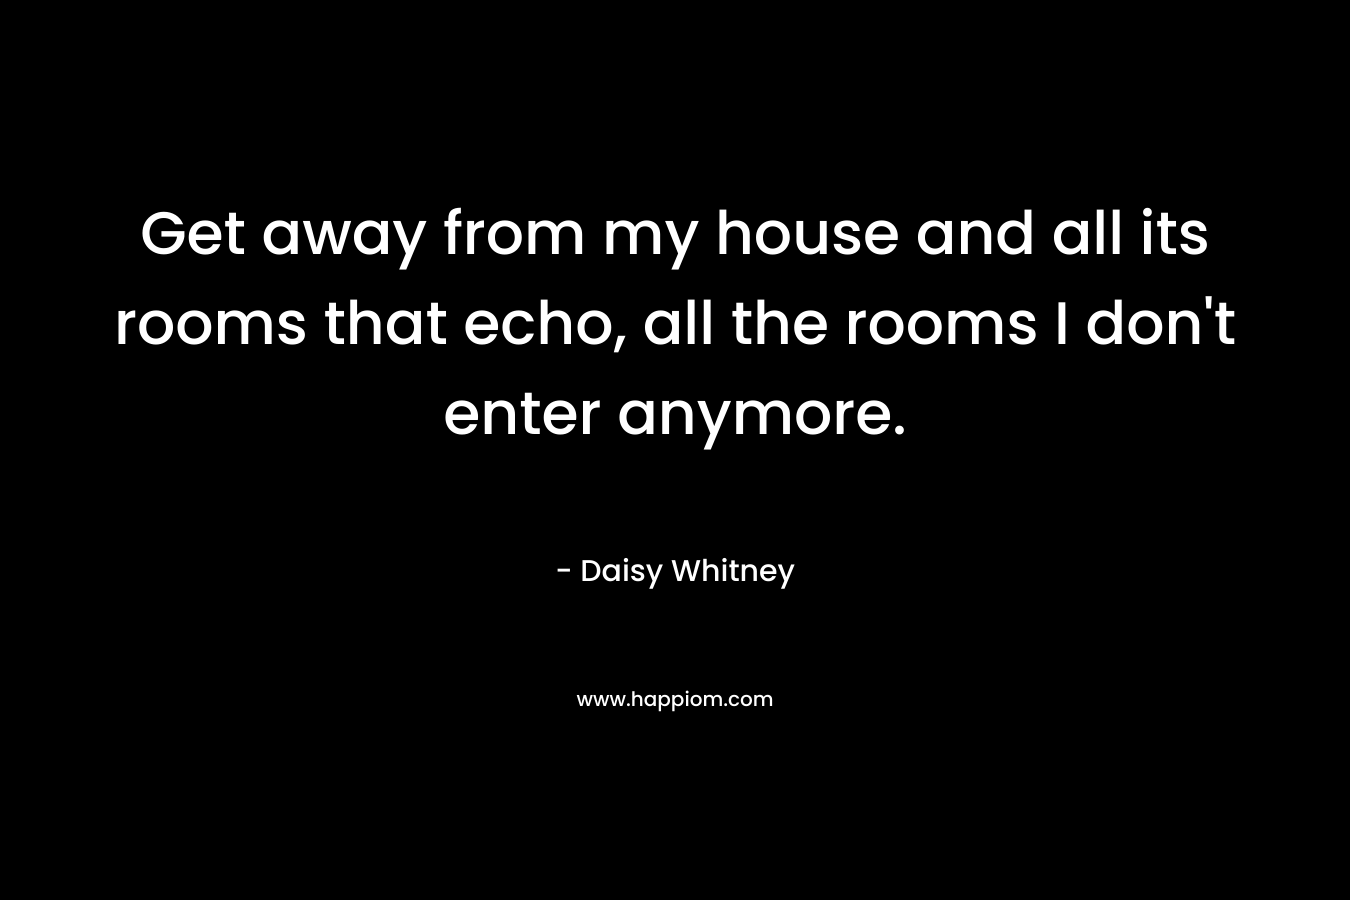 Get away from my house and all its rooms that echo, all the rooms I don’t enter anymore. – Daisy Whitney